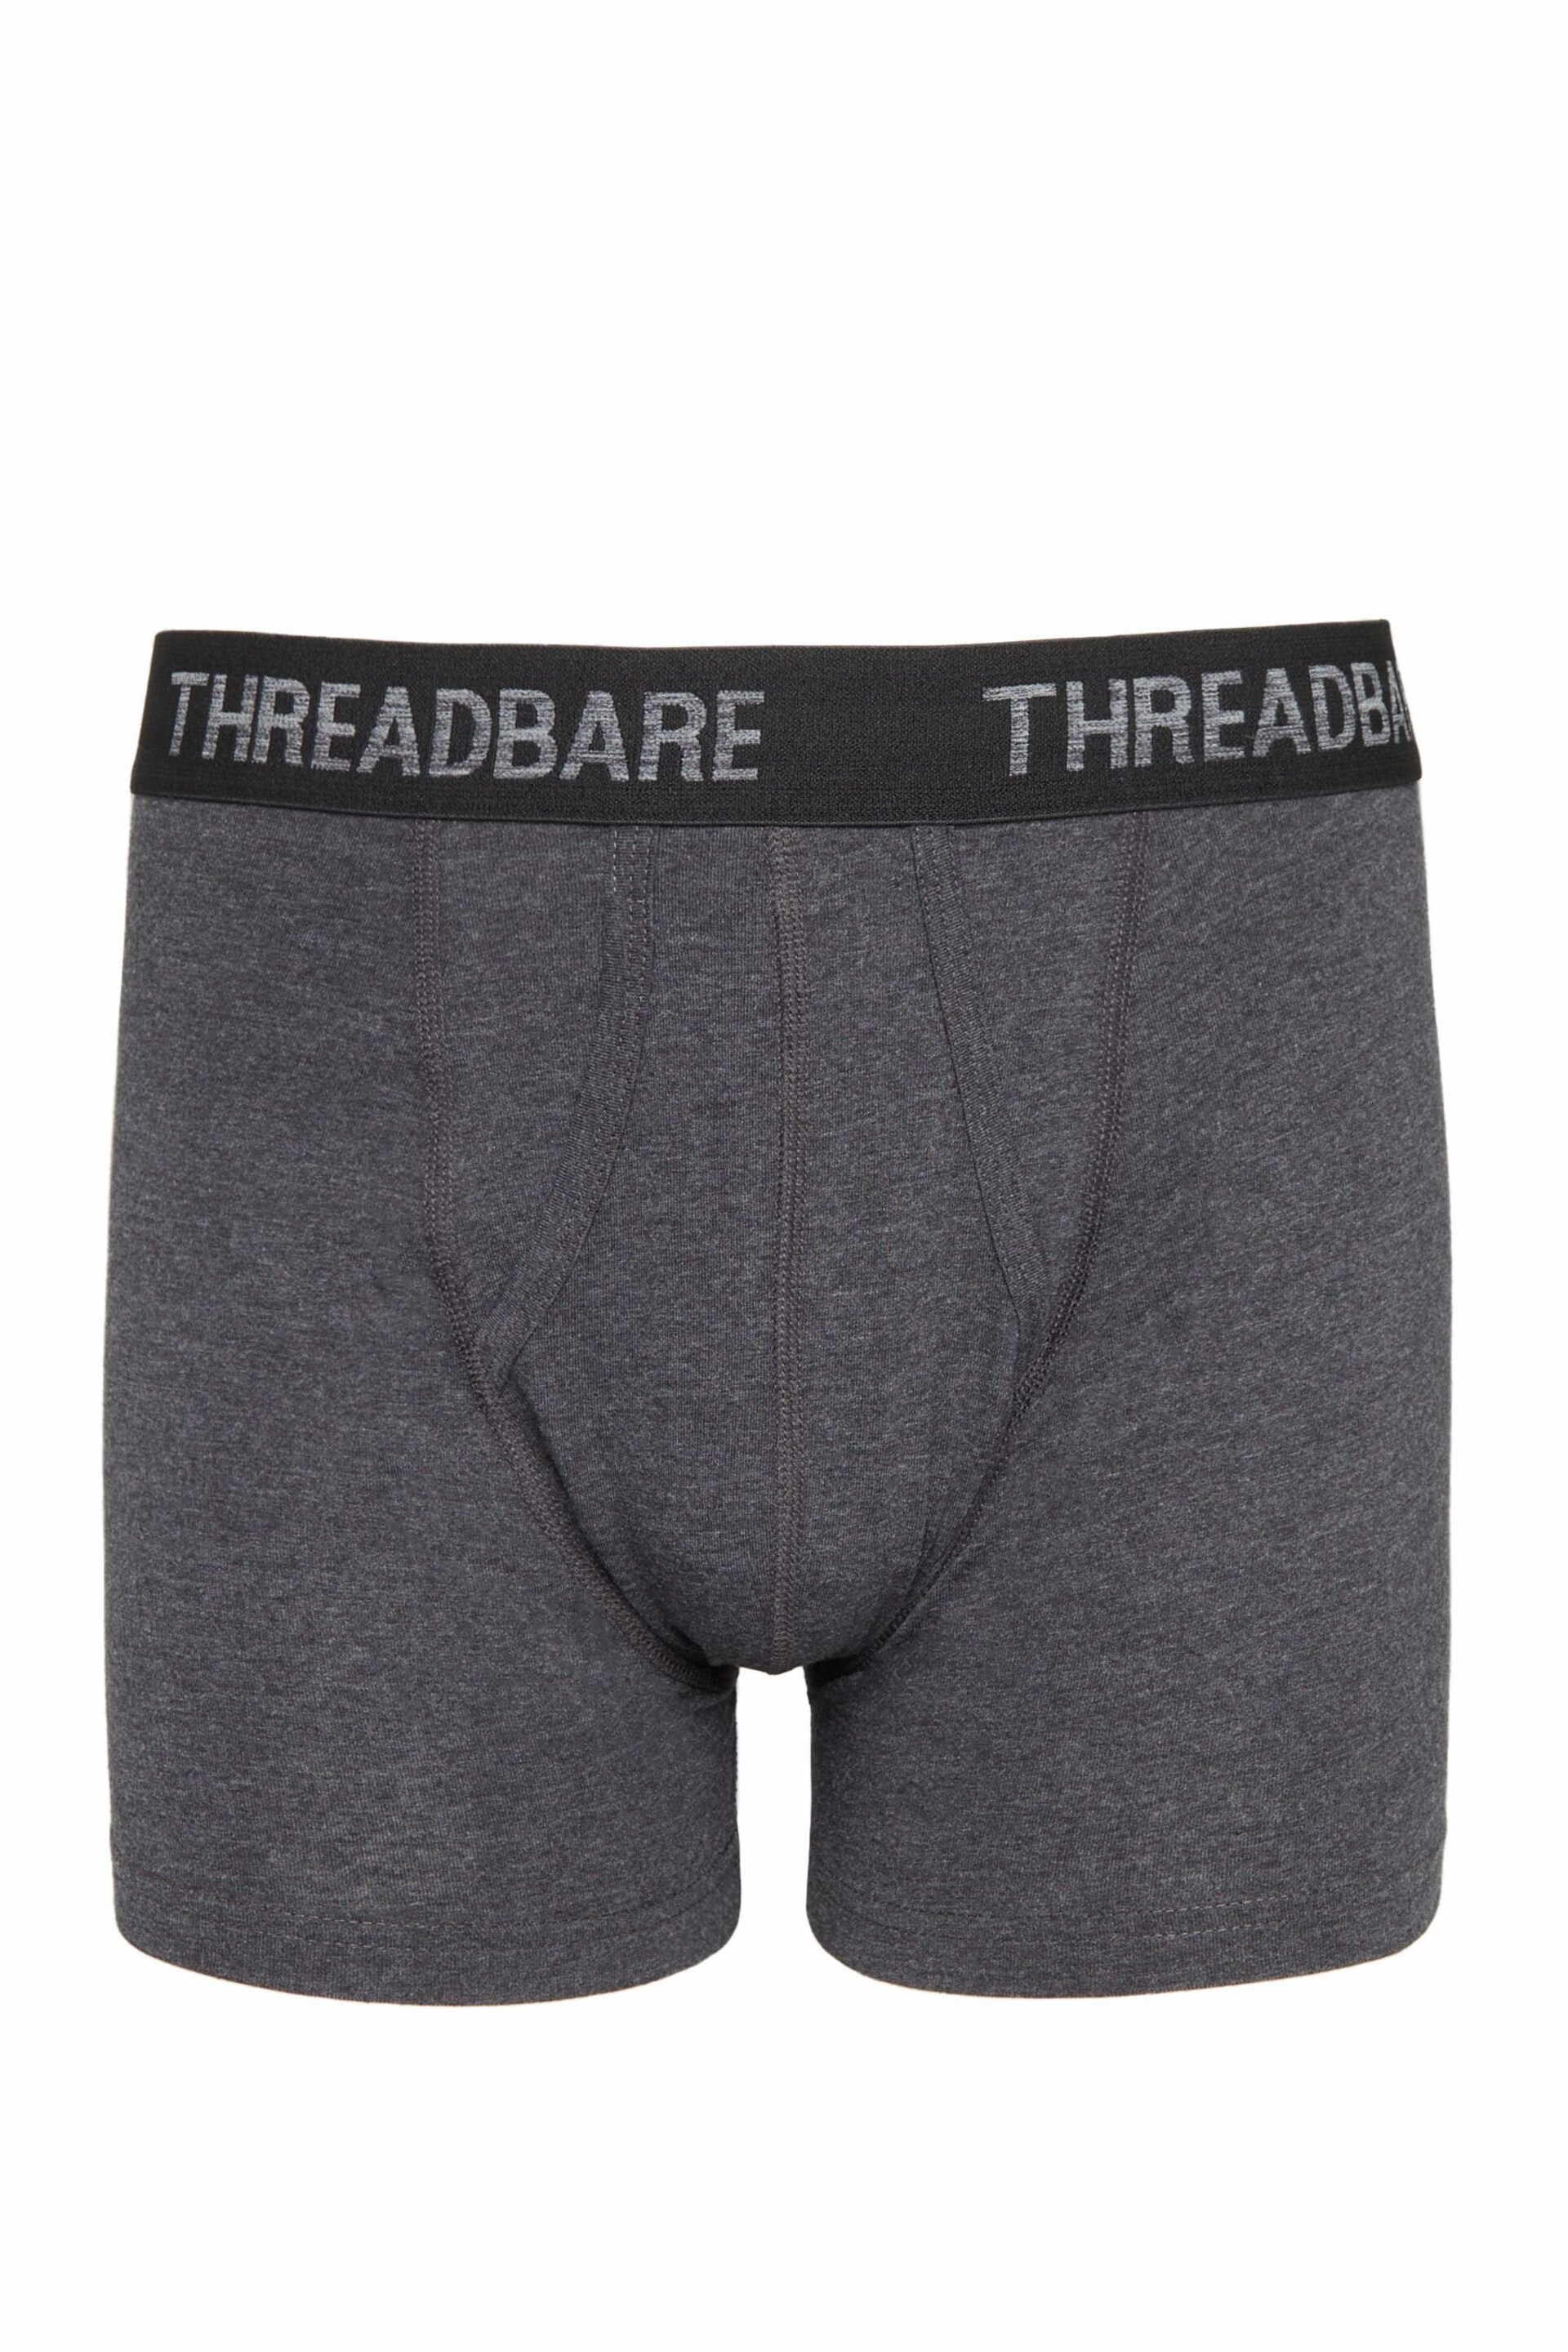 Threadbare Grey Hipster Boxers 3 Packs - Image 5 of 6